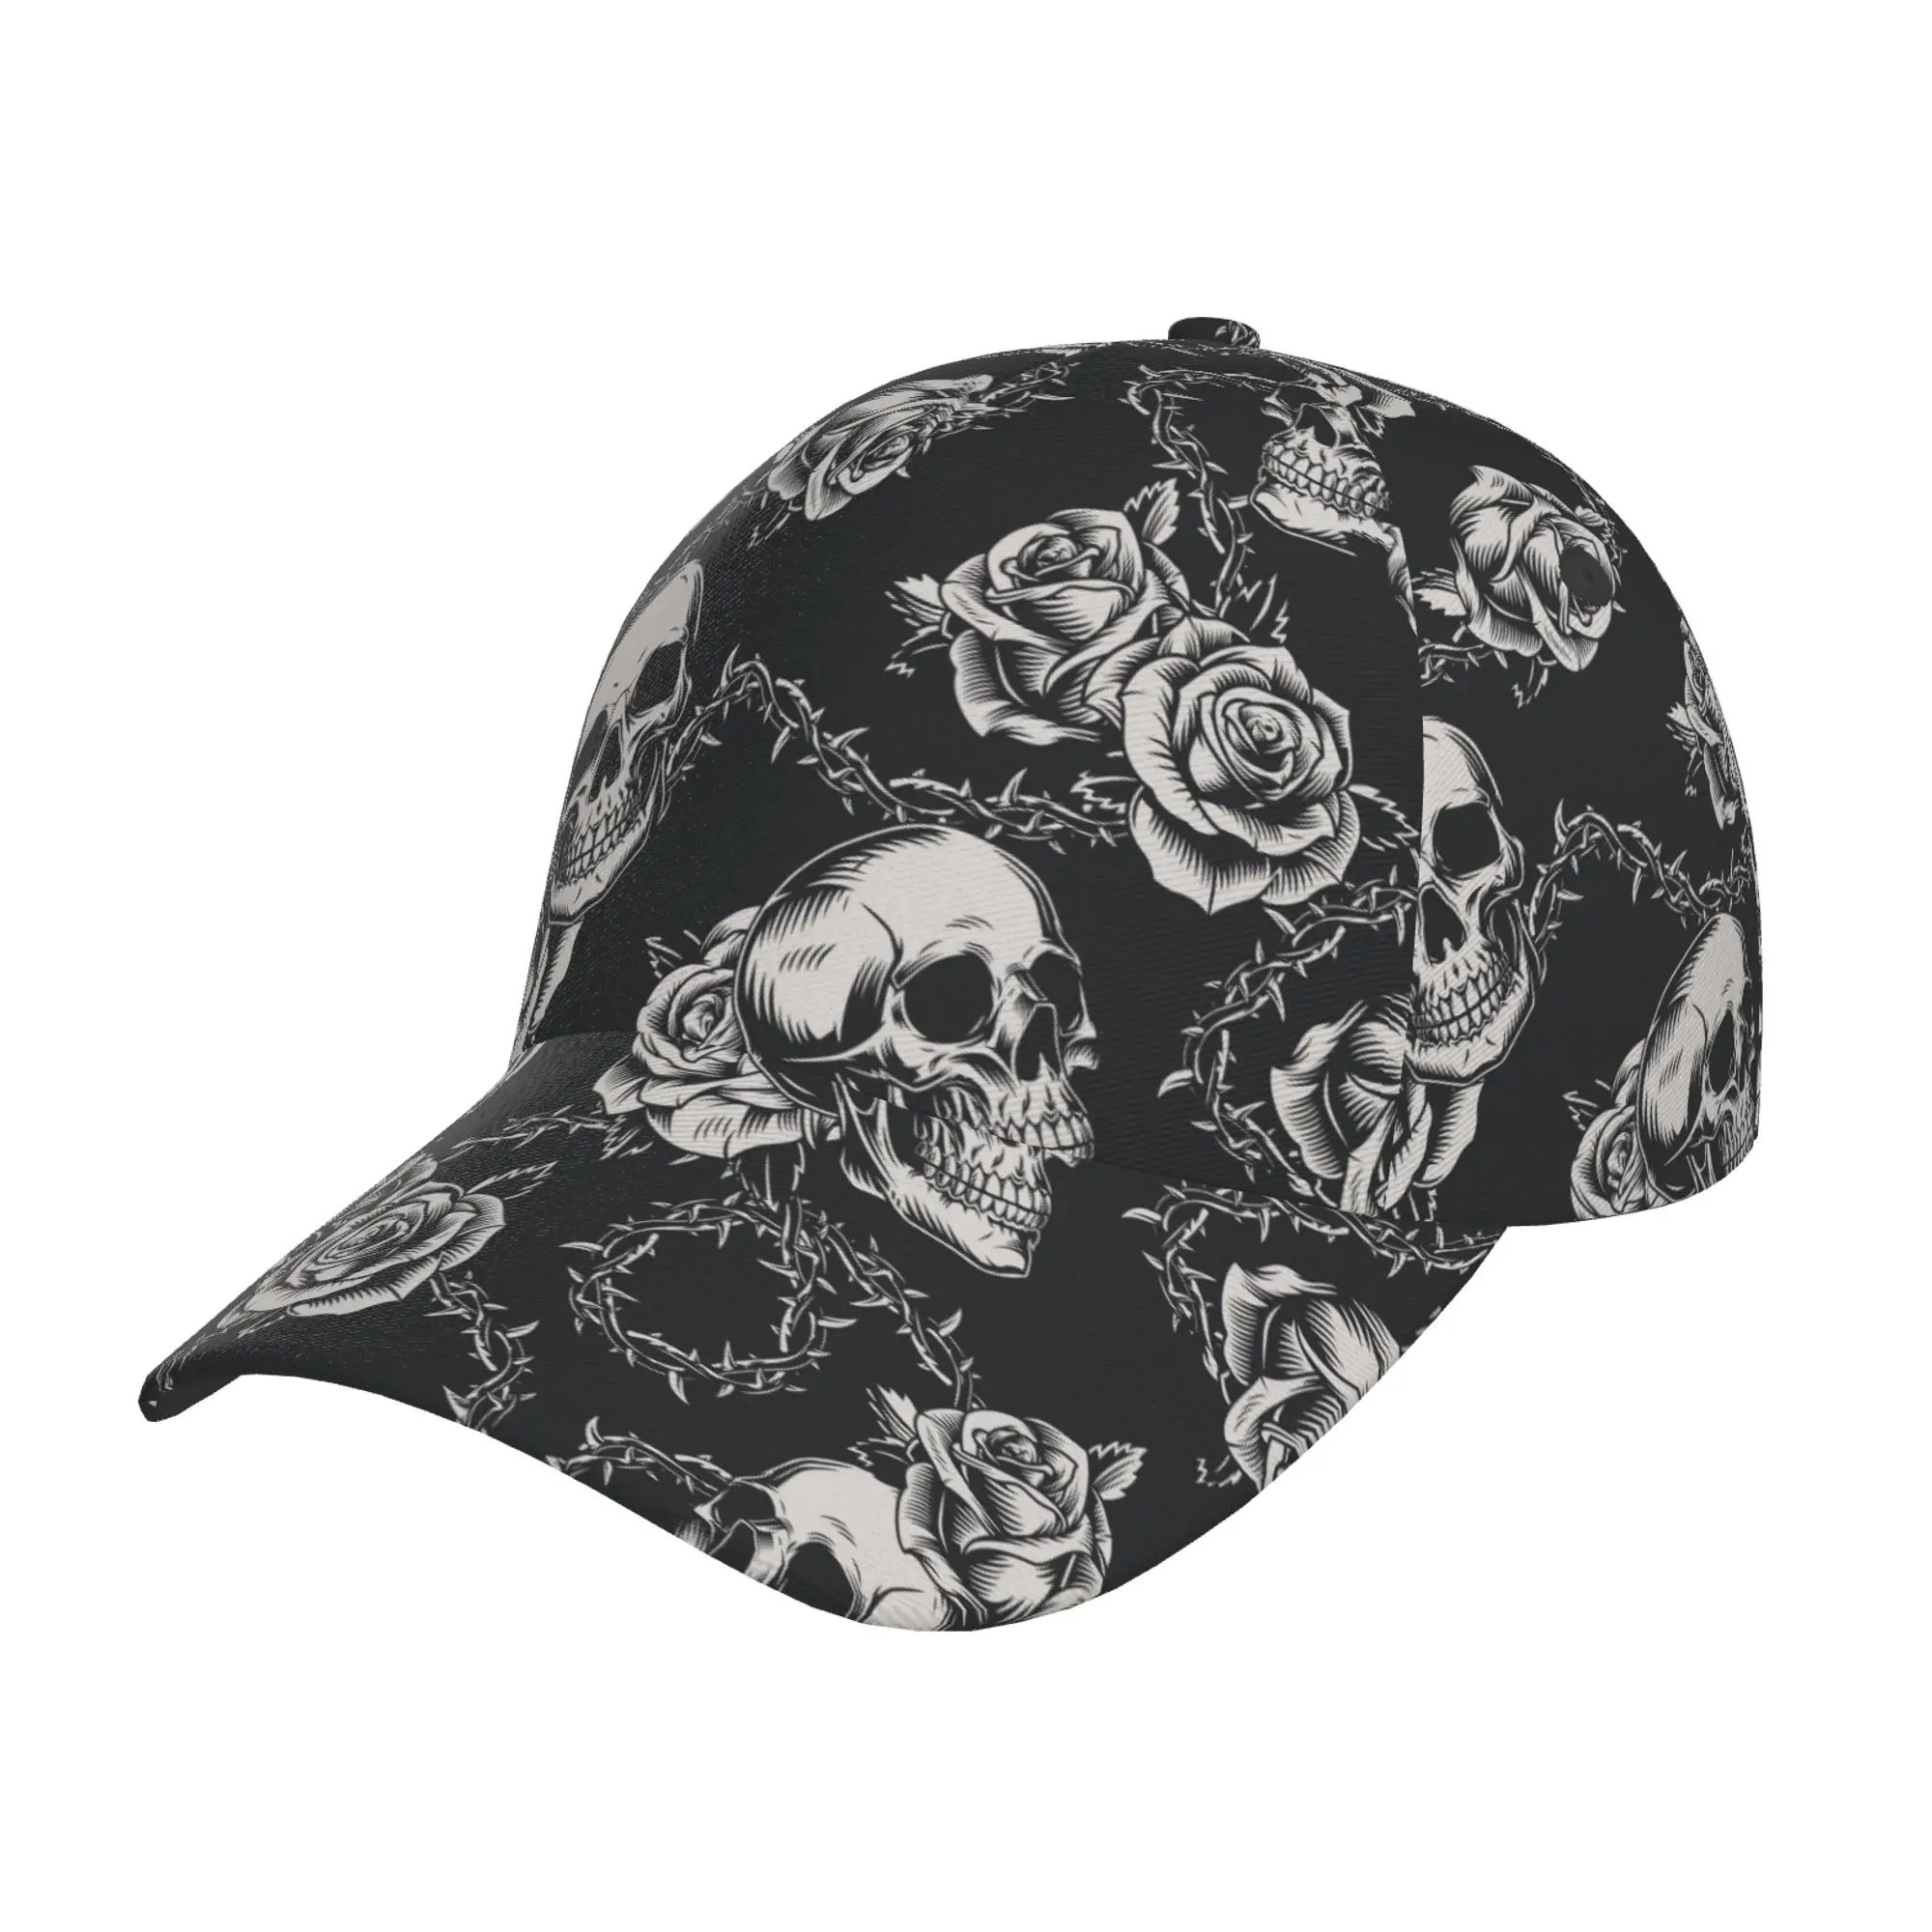 

Roses and Skulls Baseball Cap Print Men Women Cool Fashion Adjustable Dad Hat for Sports Travel One Size Snapback